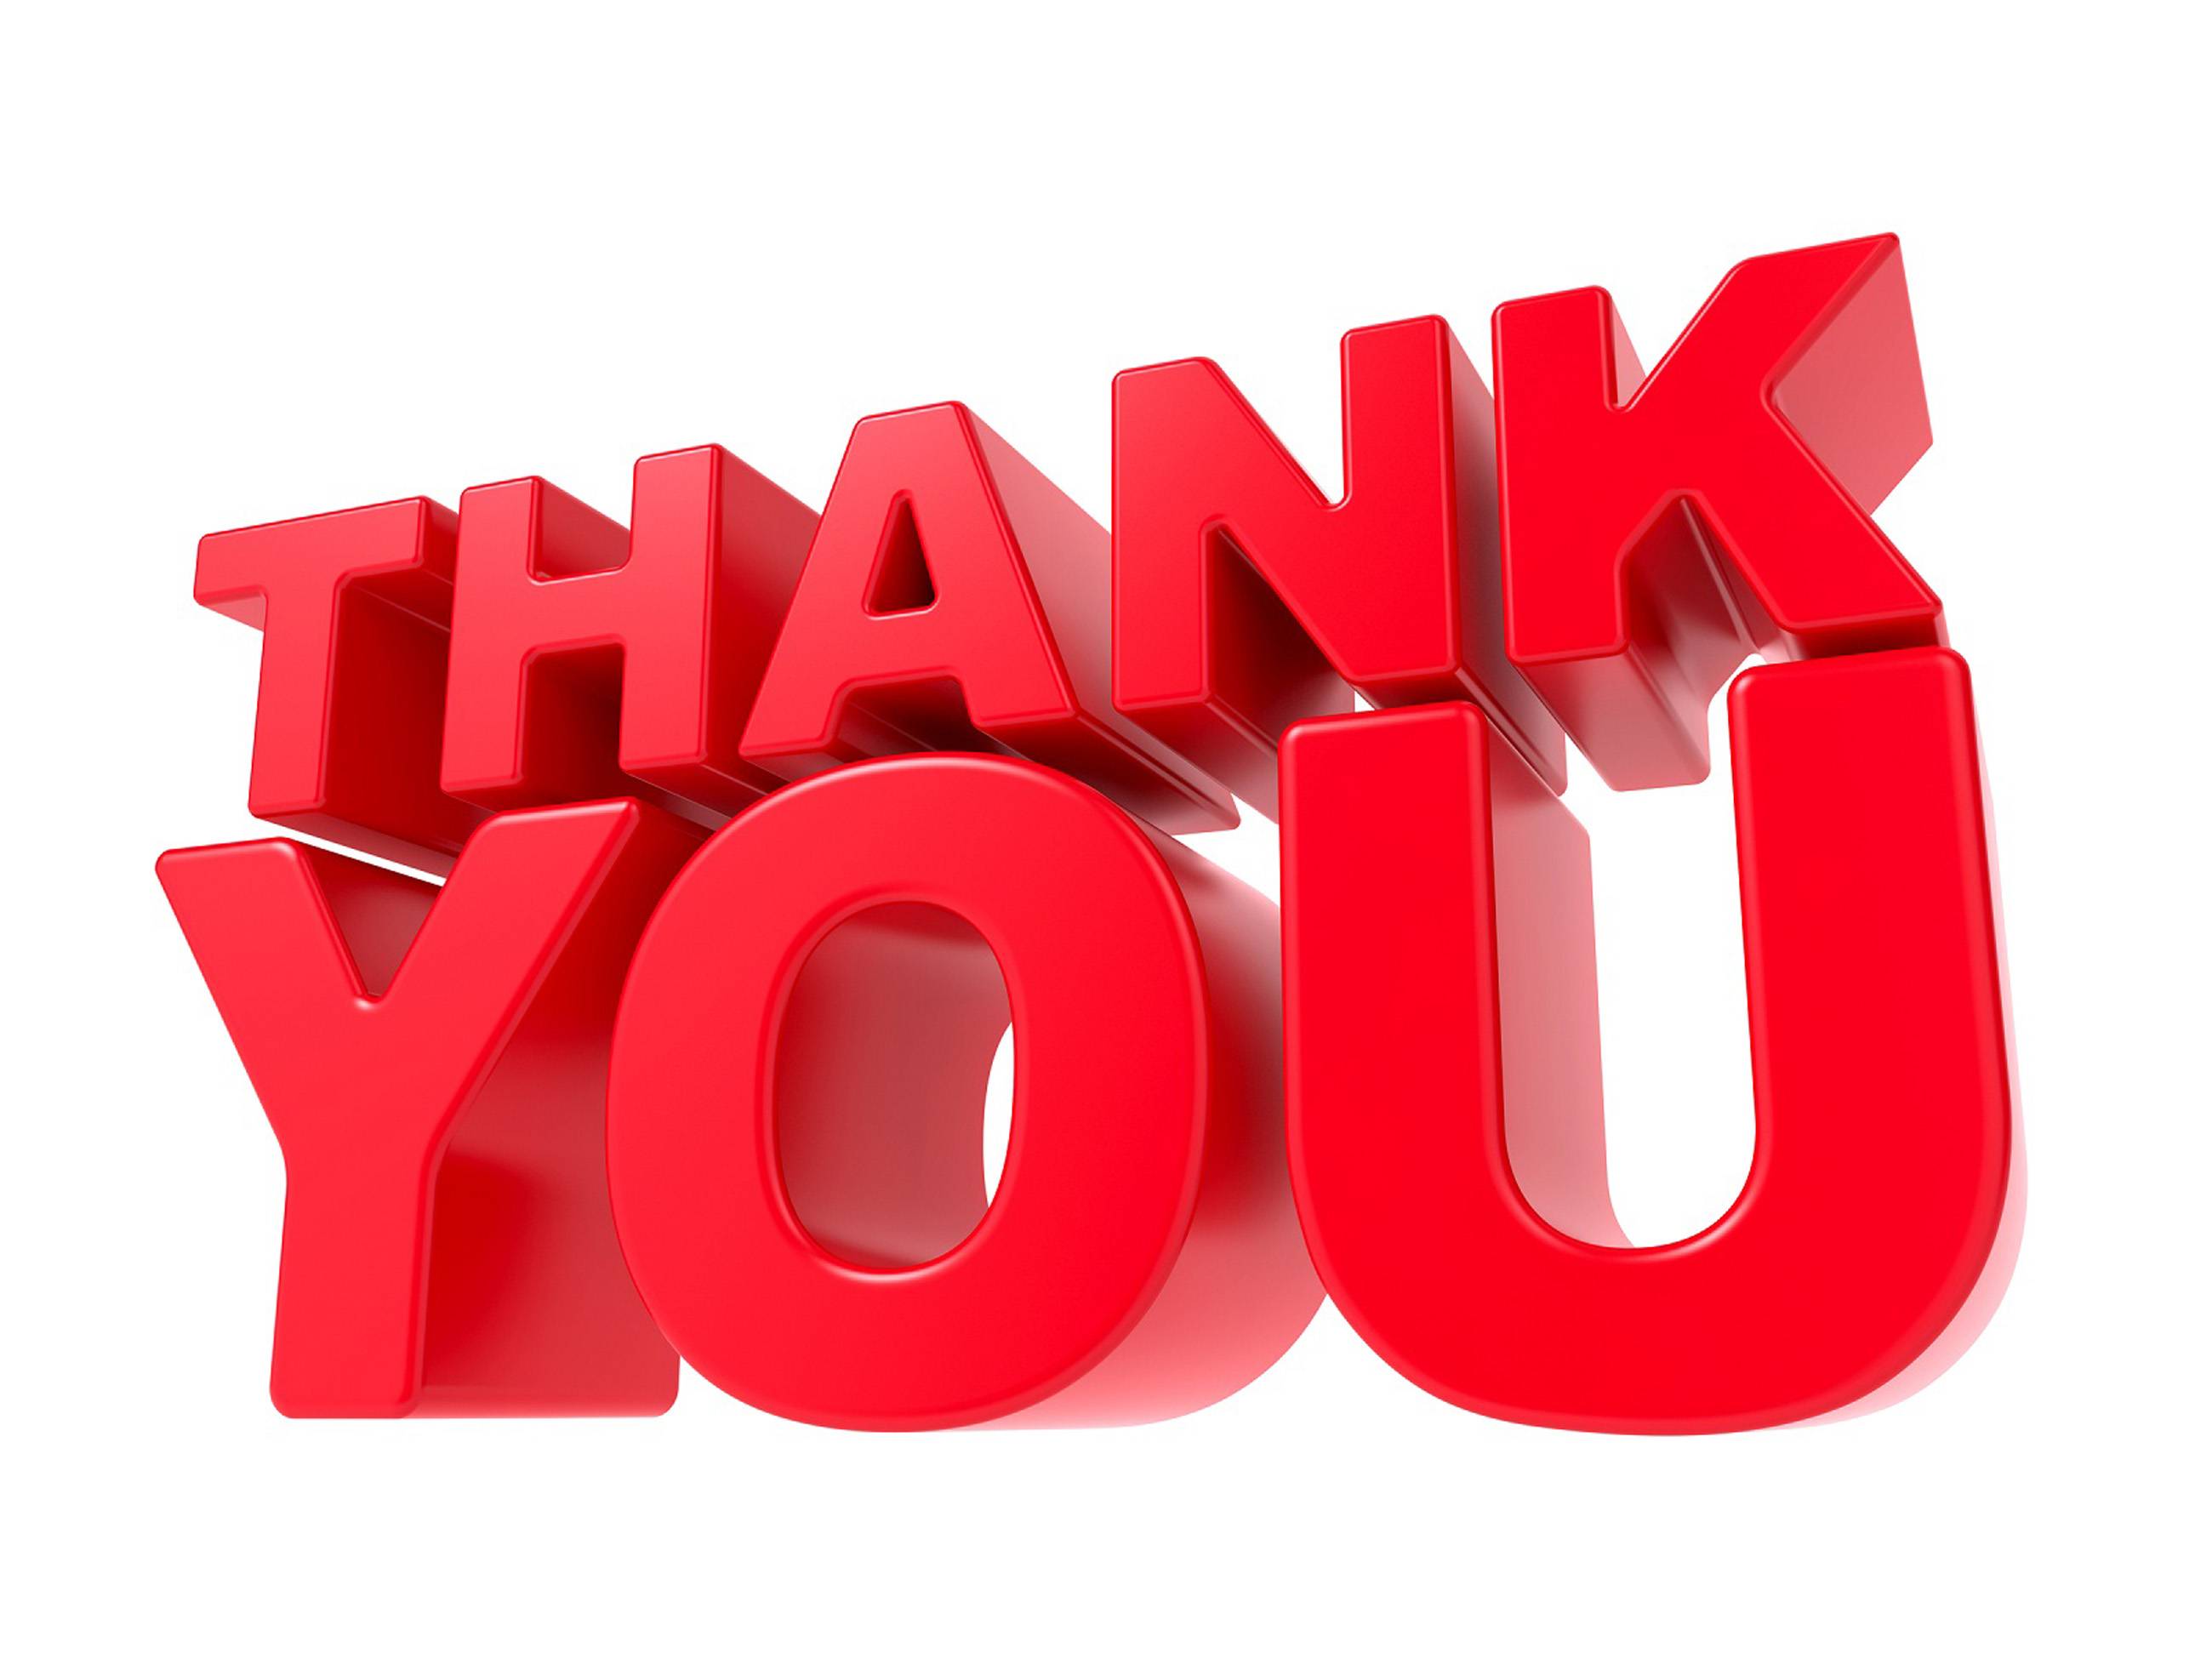 Big Thank You Simple HD Wallpaper Free Of Thank You Image Free